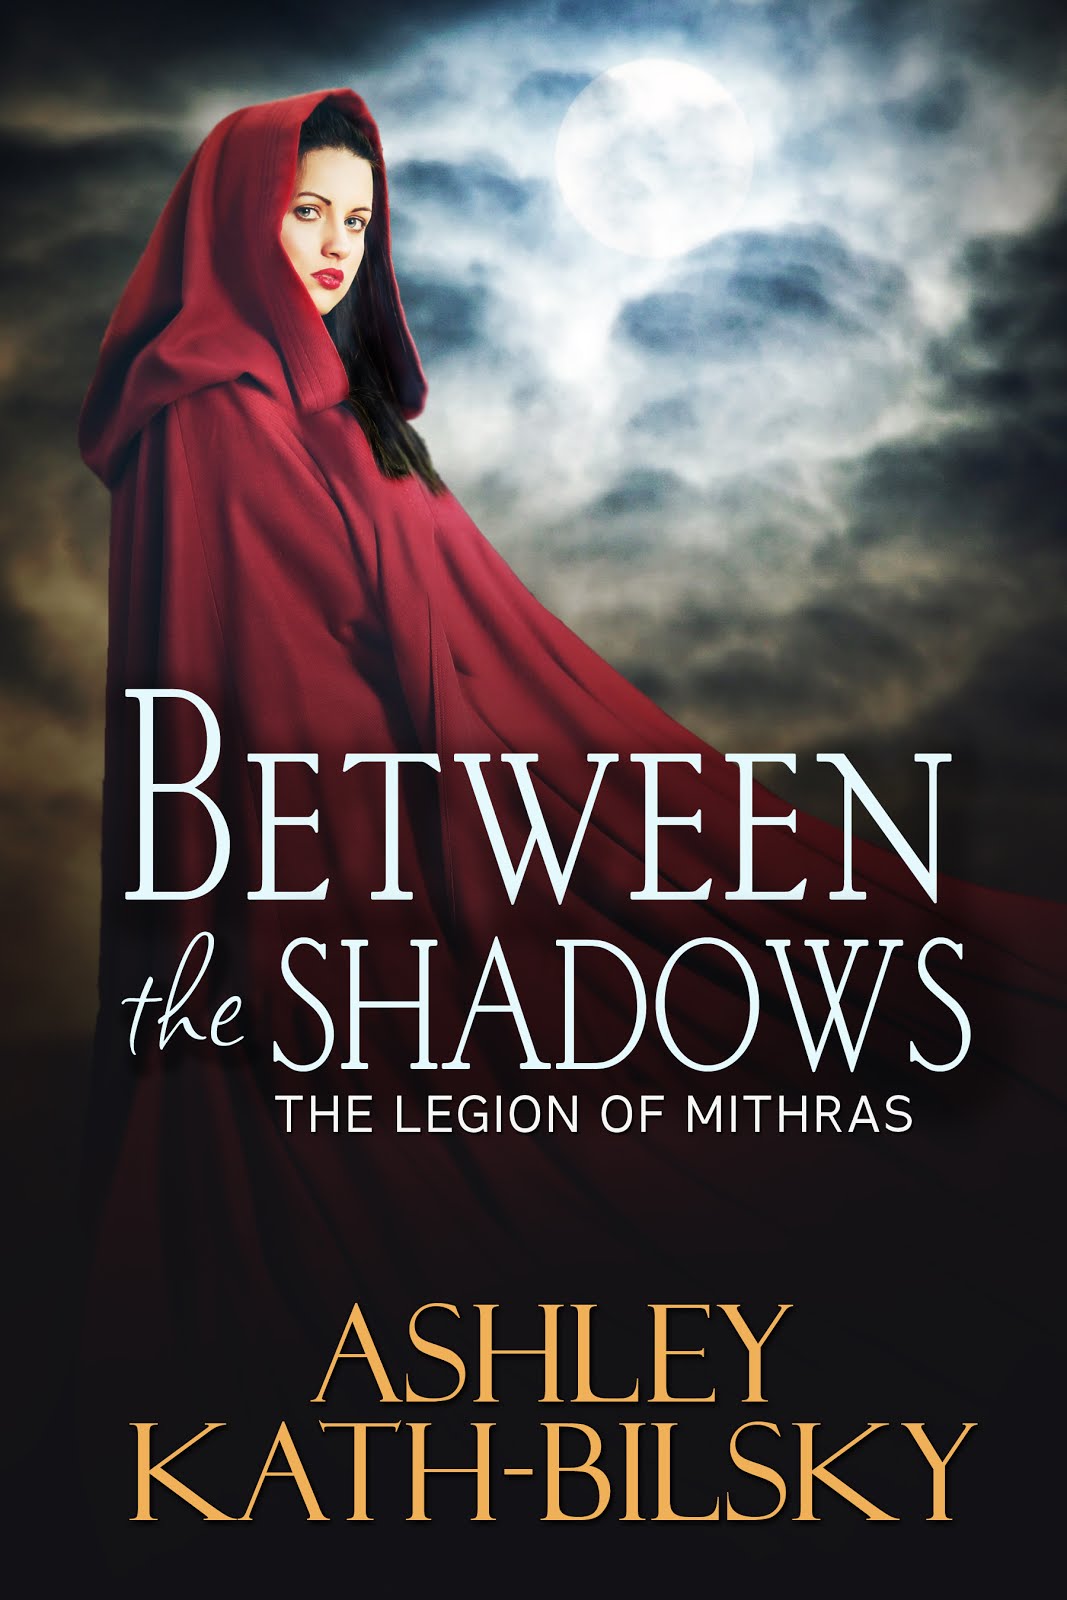 BETWEEN THE SHADOWS ~ THE LEGION OF MITHRAS